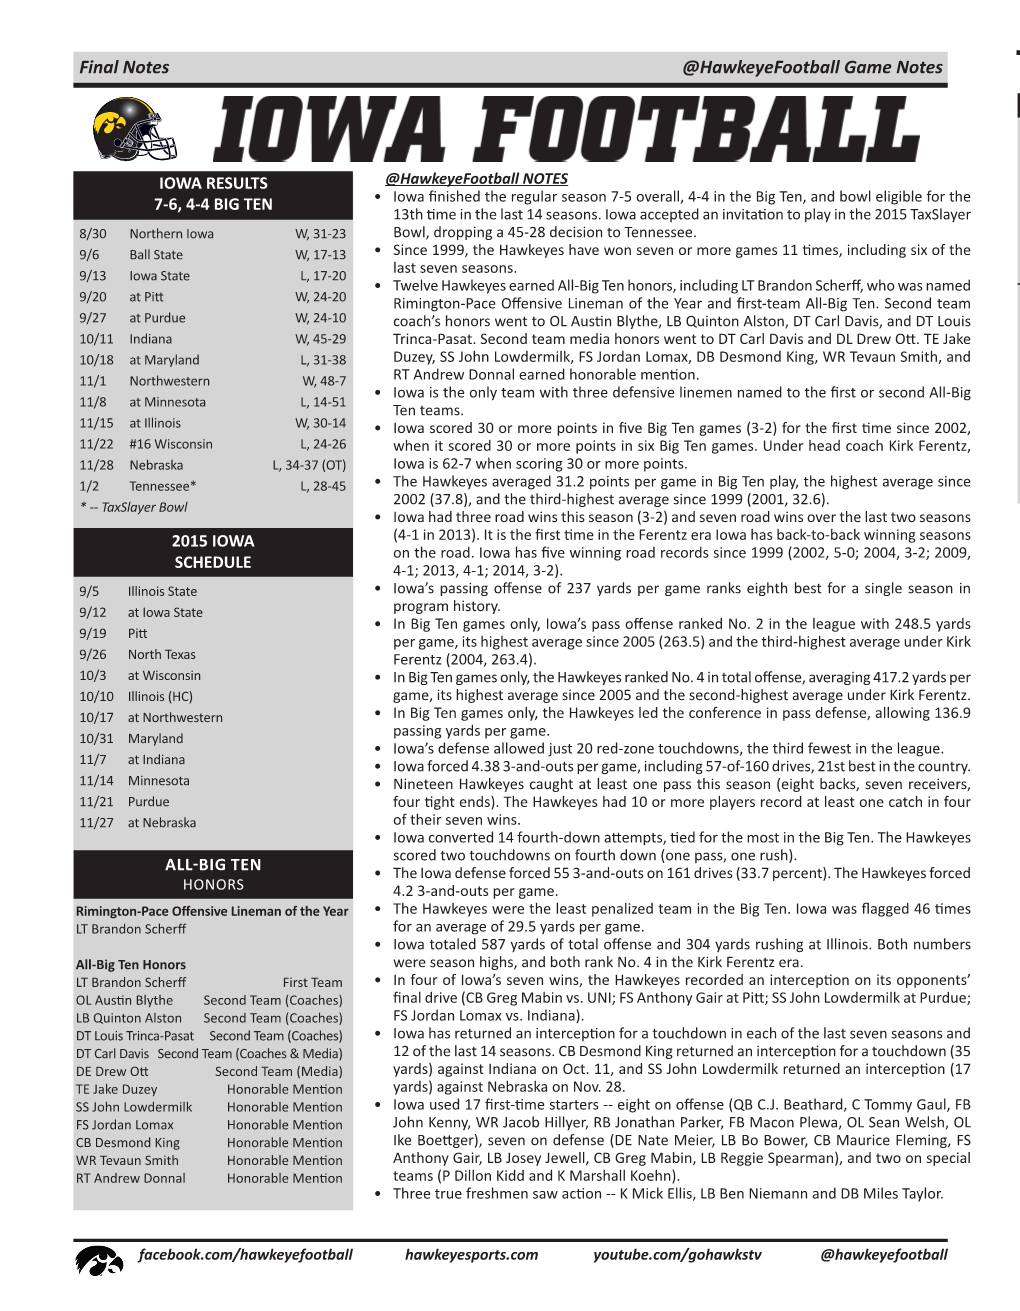 @Hawkeyefootball Game Notes Final Notes IO TE